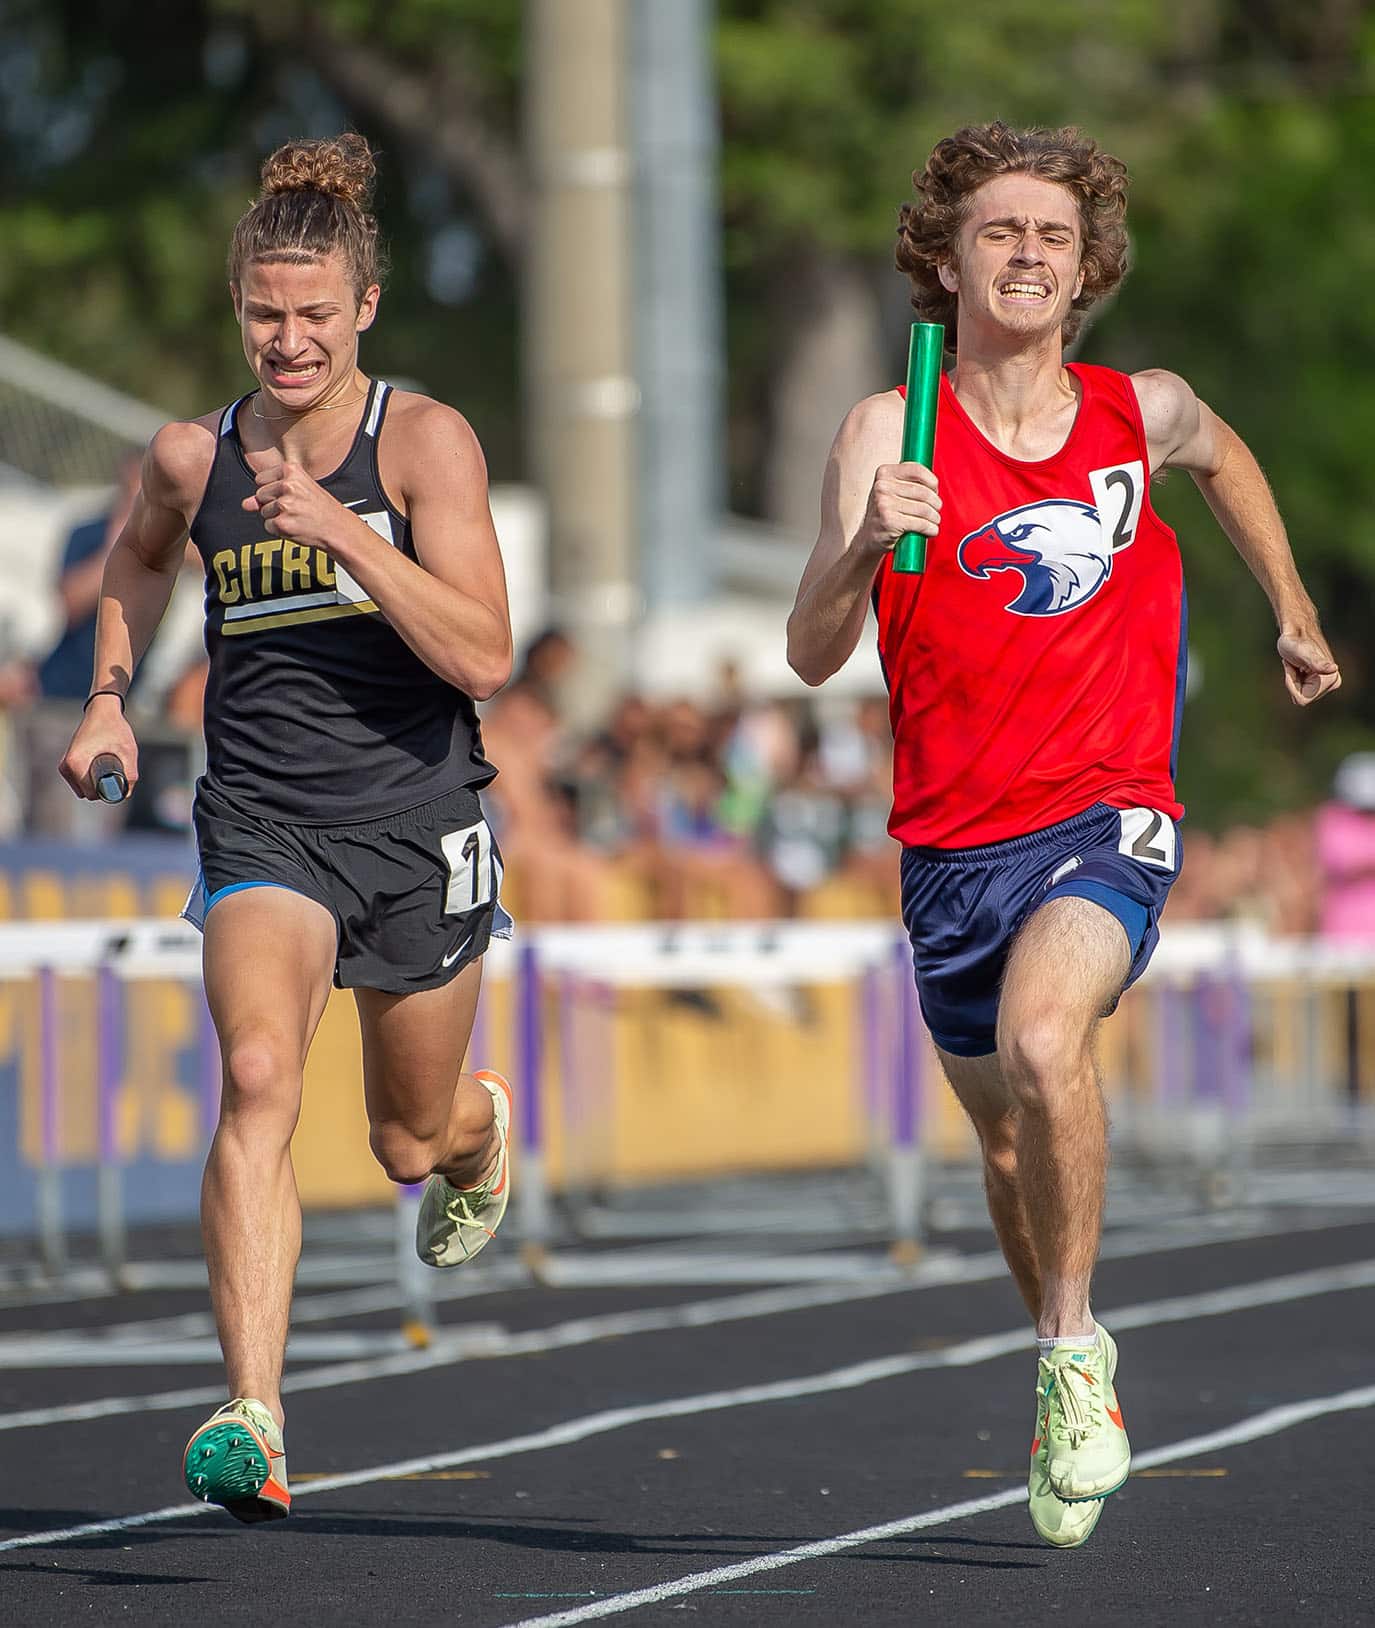 Springstead High’s Andrew Brittain anchored the 4x800 relay finishing a split second behind Citrus High. Photo by JOE DiCRISTOFALO